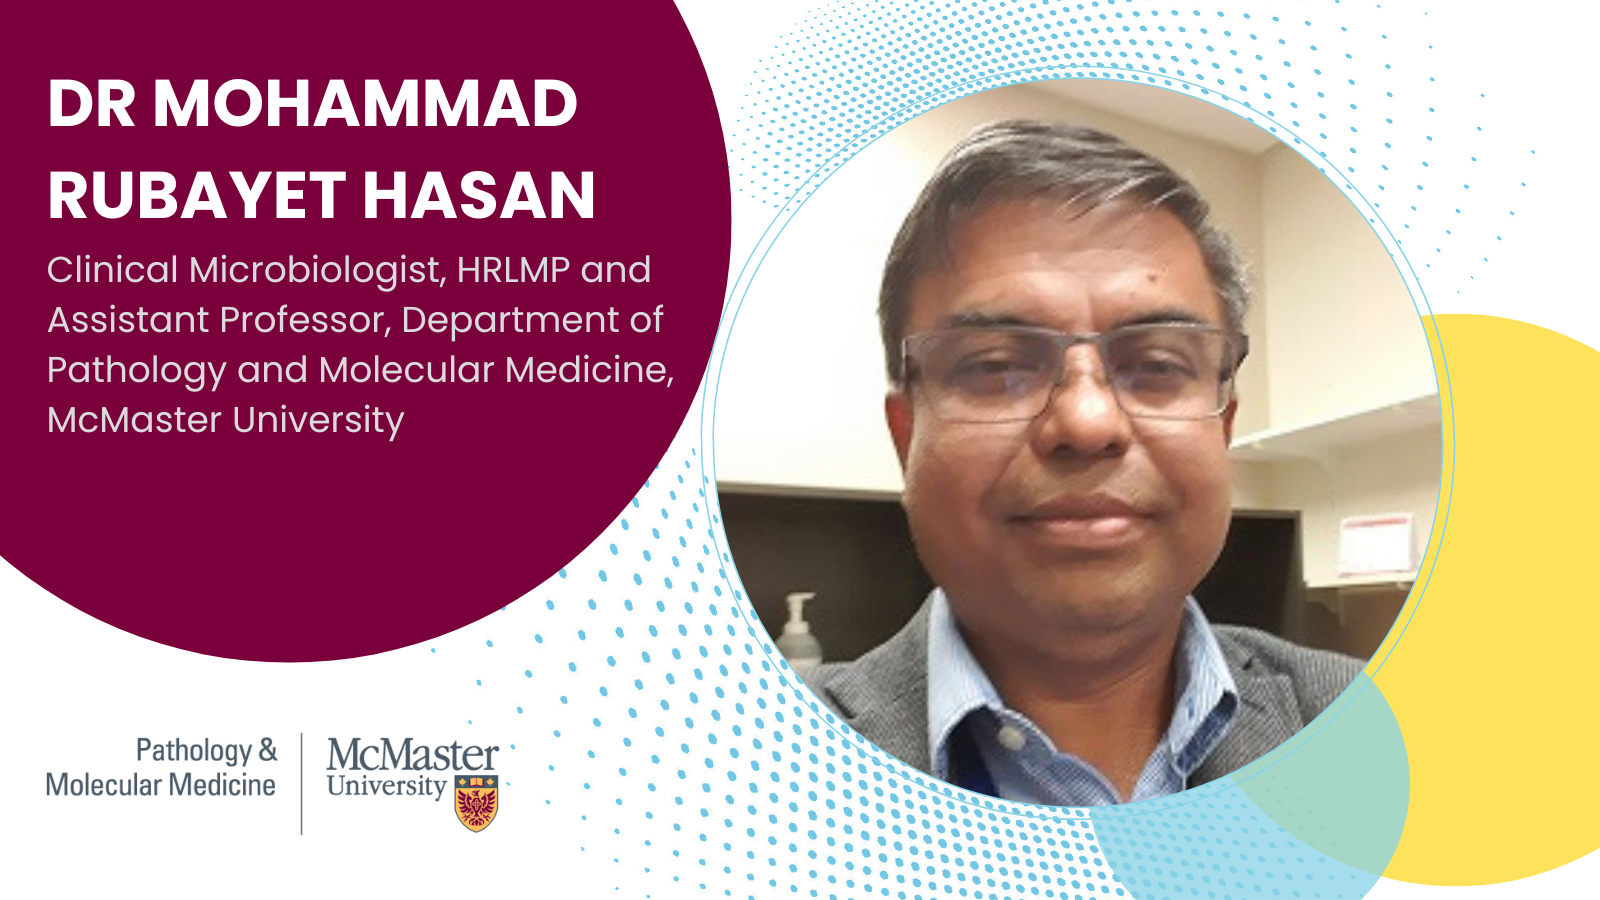 Headshot of Dr Mohammad Rubayet Hasan. Clinical Microbiologist, HRLMP and Assistant Professor, Department of Pathology and Molecular Medicine, McMaster University